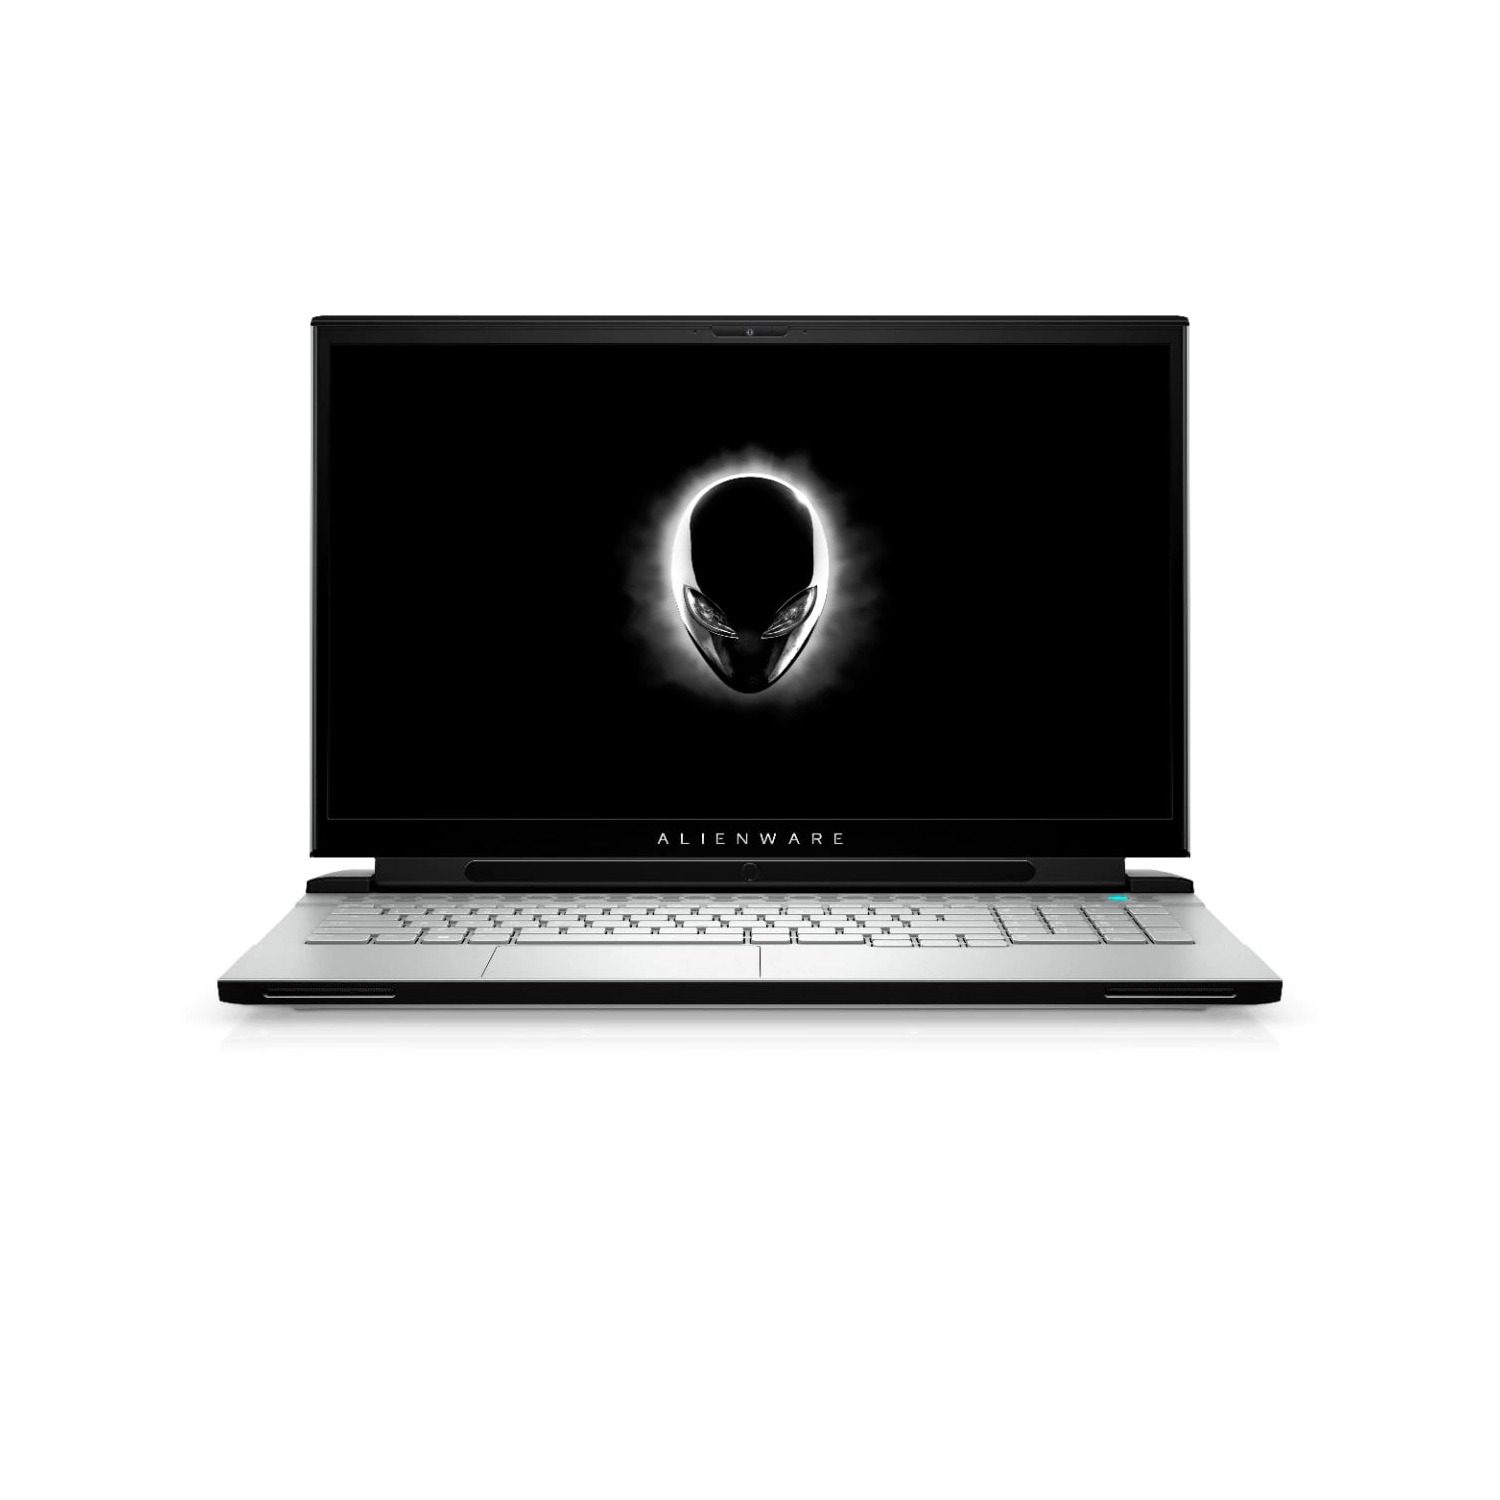 Refurbished (Excellent) - Dell Alienware m17 R3 Gaming Laptop (2020), 17.3" FHD, Core i7, 256GB SSD + 256GB SSD, 16GB RAM, RTX 2060, 5 GHz, 10th Gen CPU Certified